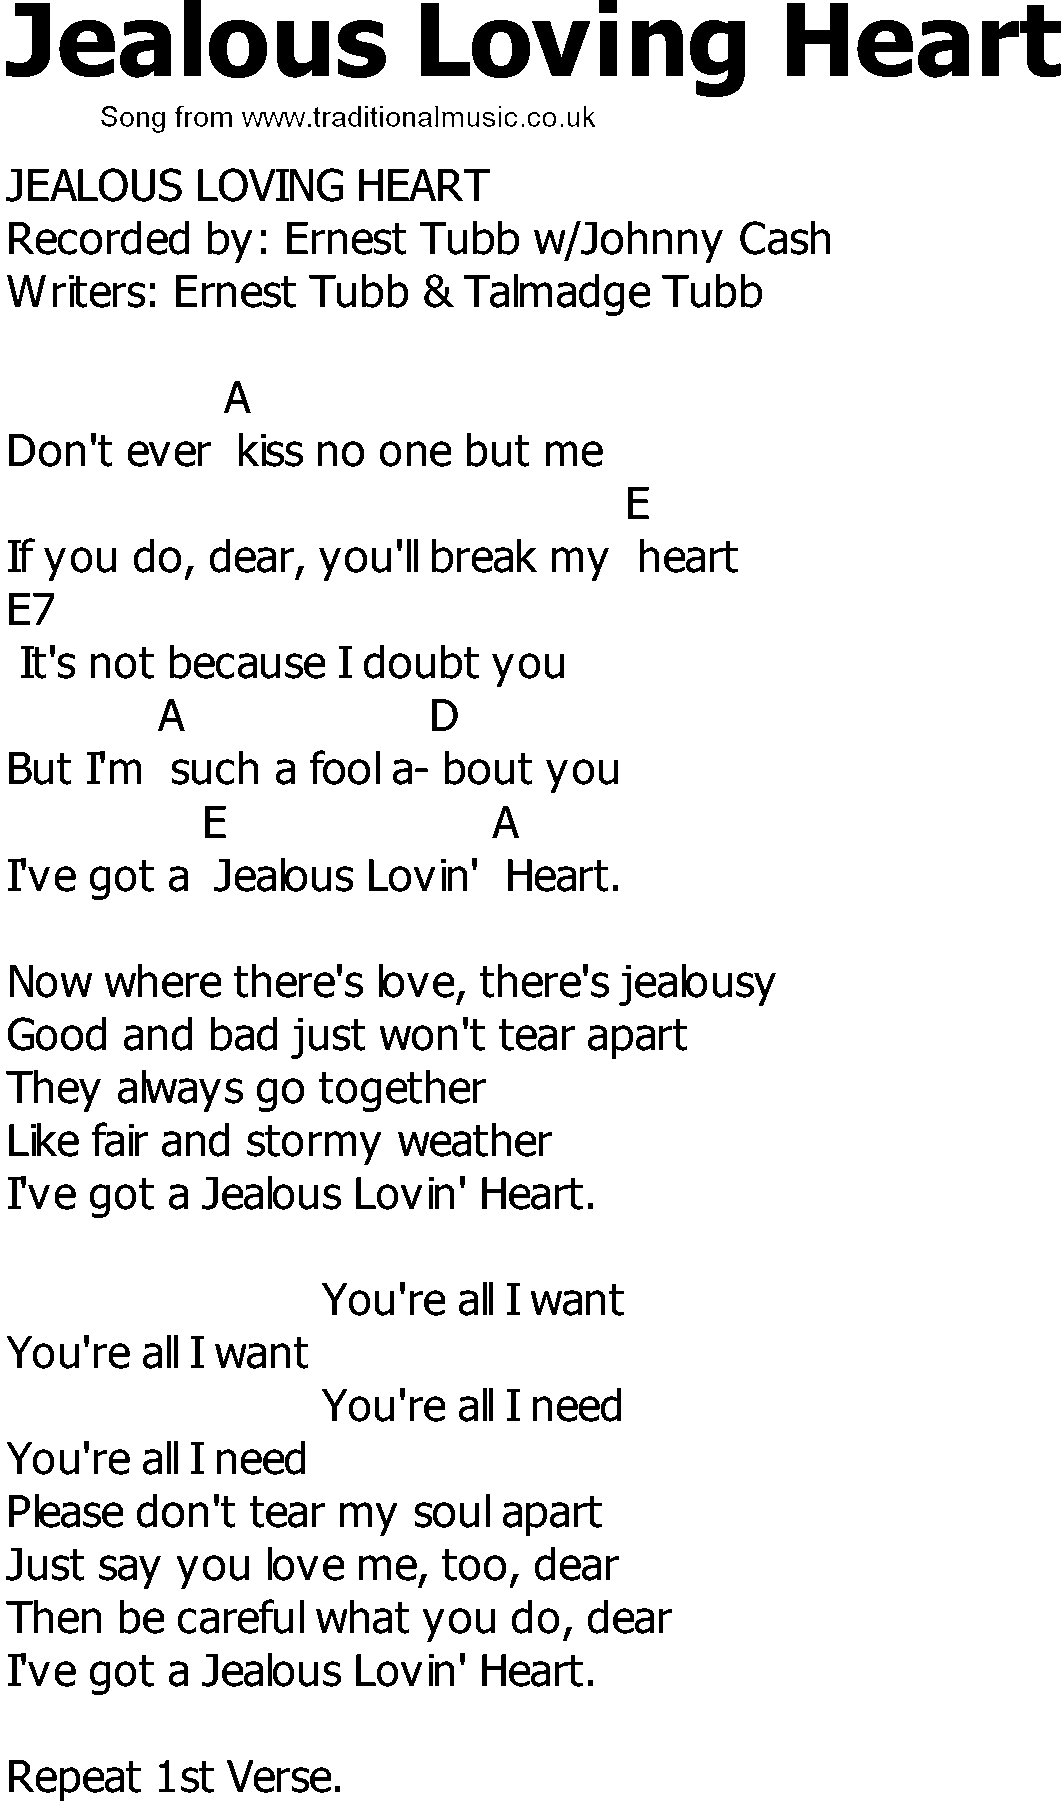 Old Country song lyrics with chords - Jealous Loving Heart